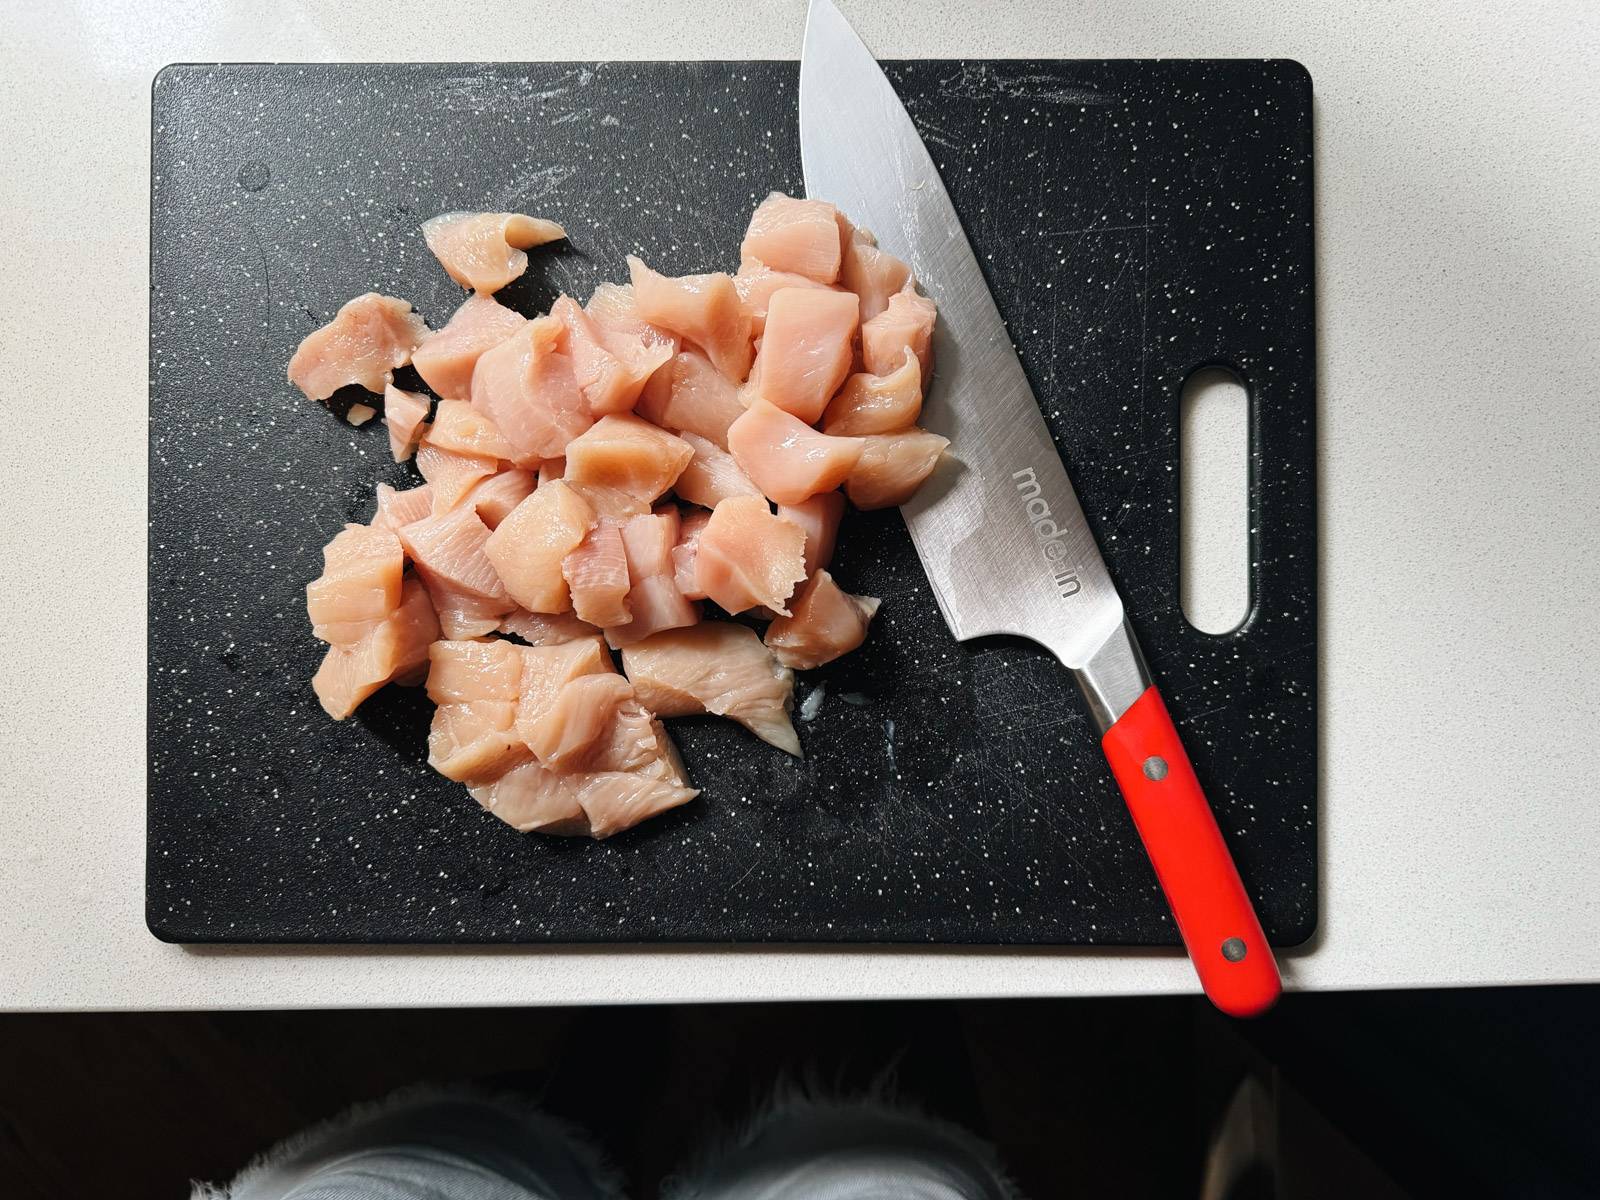 Cubed chicken on a cutting board.